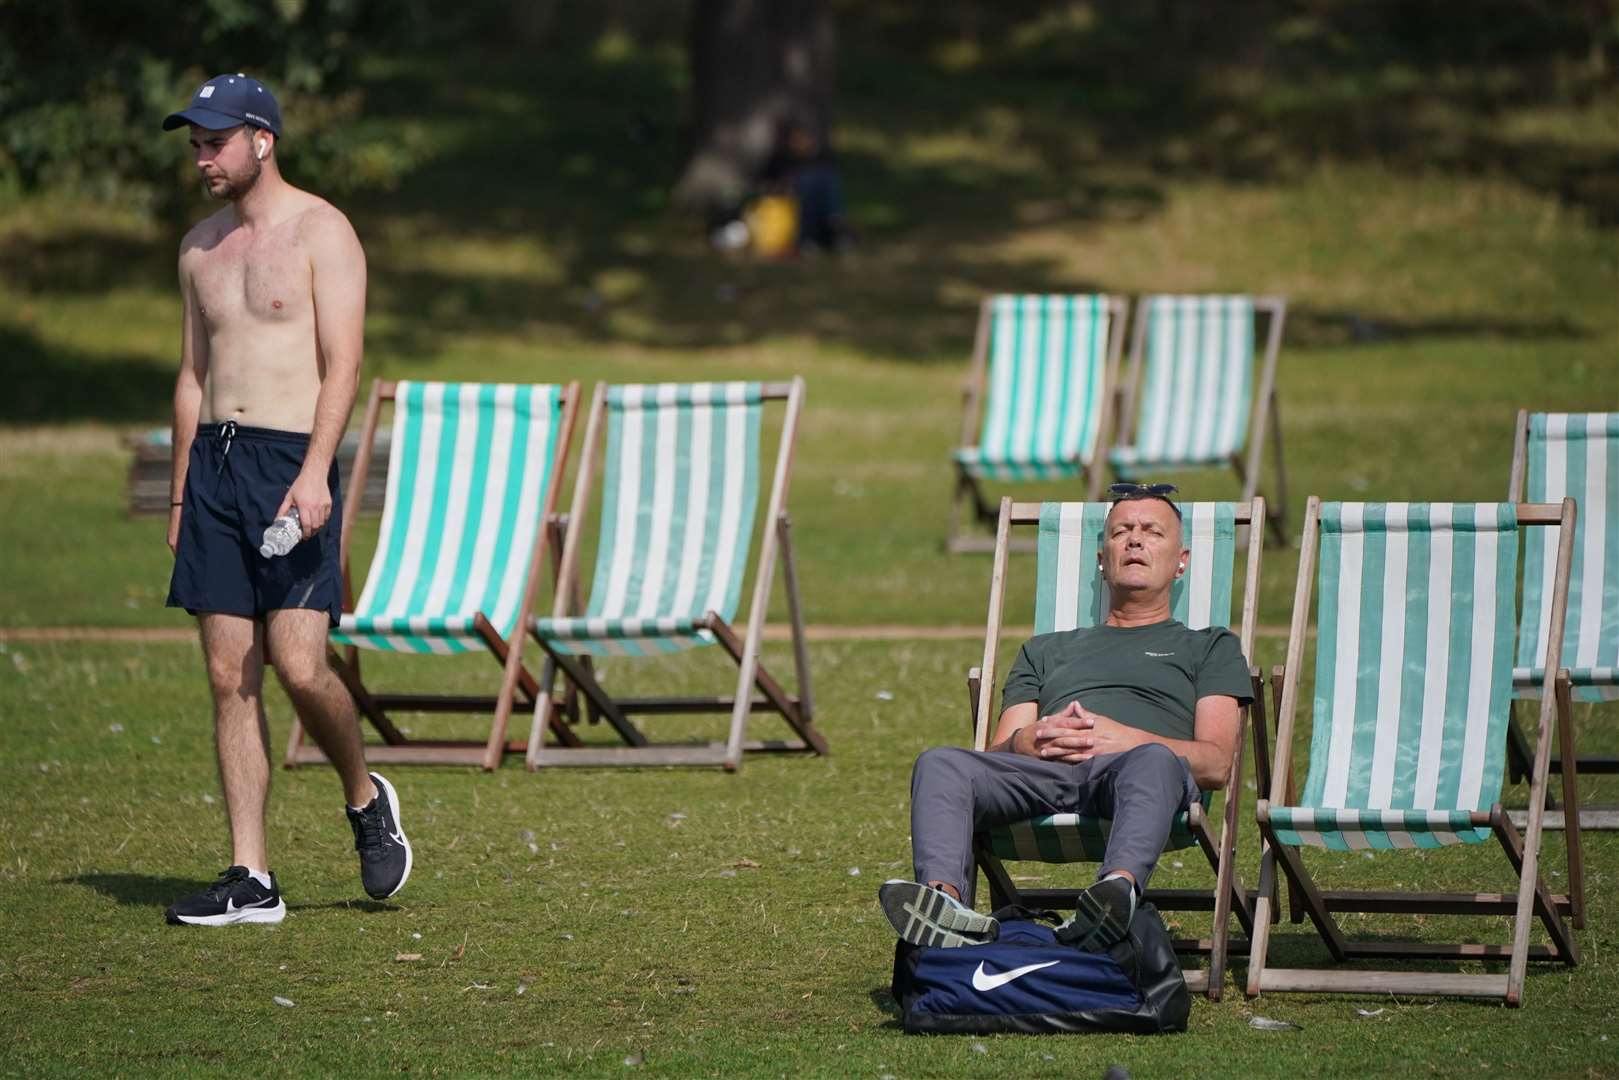 People enjoying the warm weather in Hyde Park in central London on Sunday (Jonathan Brady/PA)